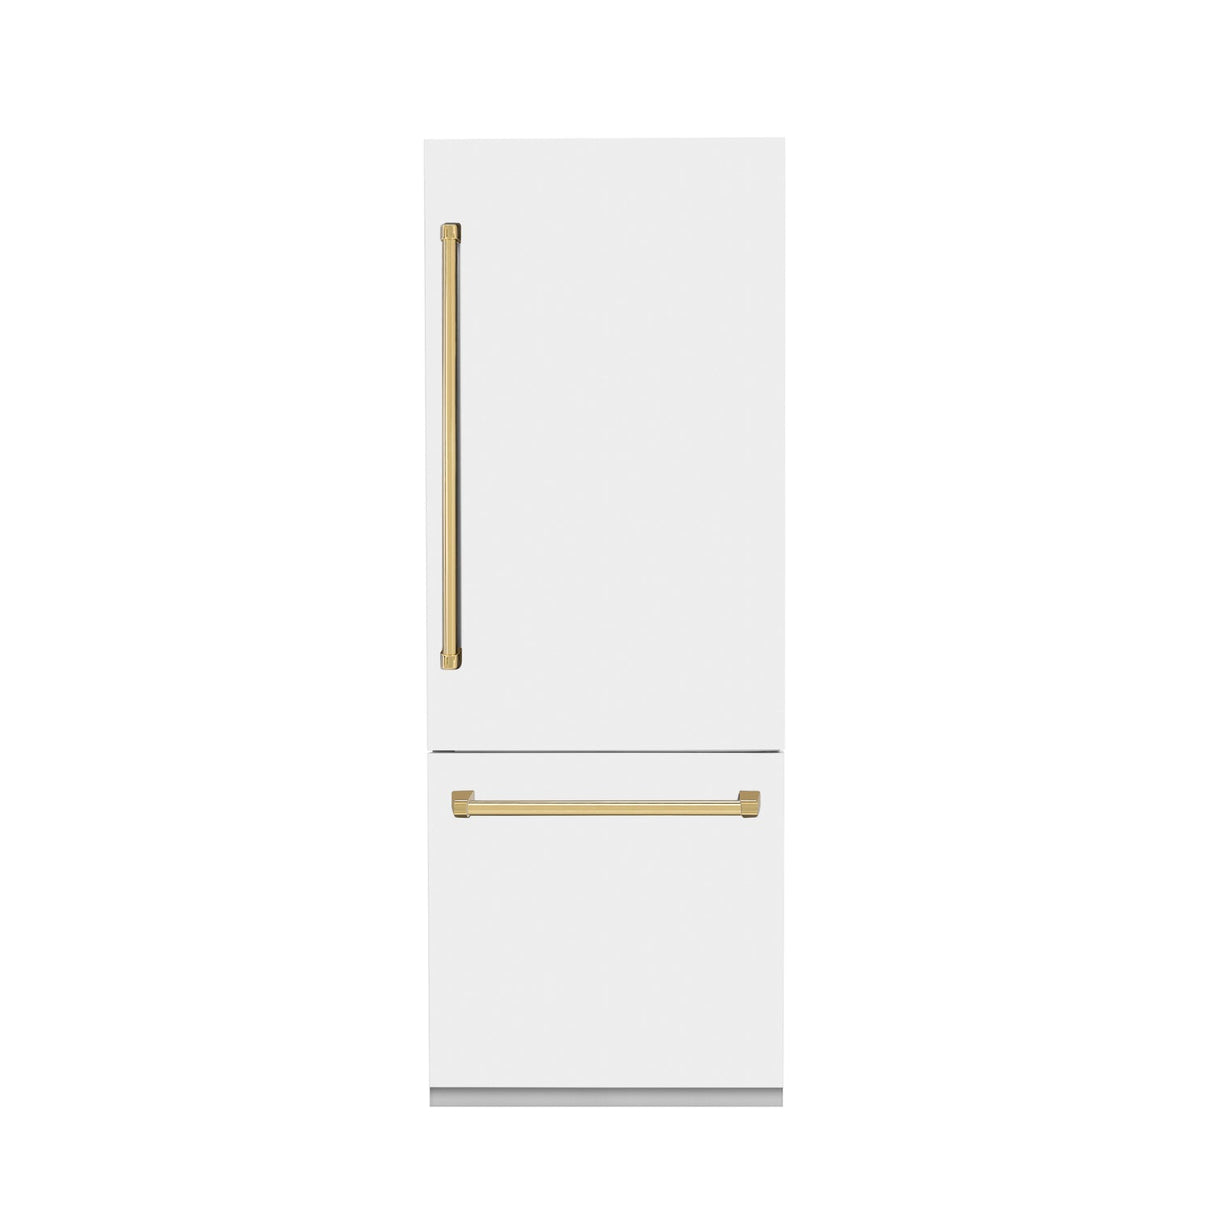 ZLINE Autograph Edition 30 in. 16.1 cu. ft. Built-in 2-Door Bottom Freezer Refrigerator with Internal Water and Ice Dispenser in White Matte with Polished Gold Accents (RBIVZ-WM-30-G)